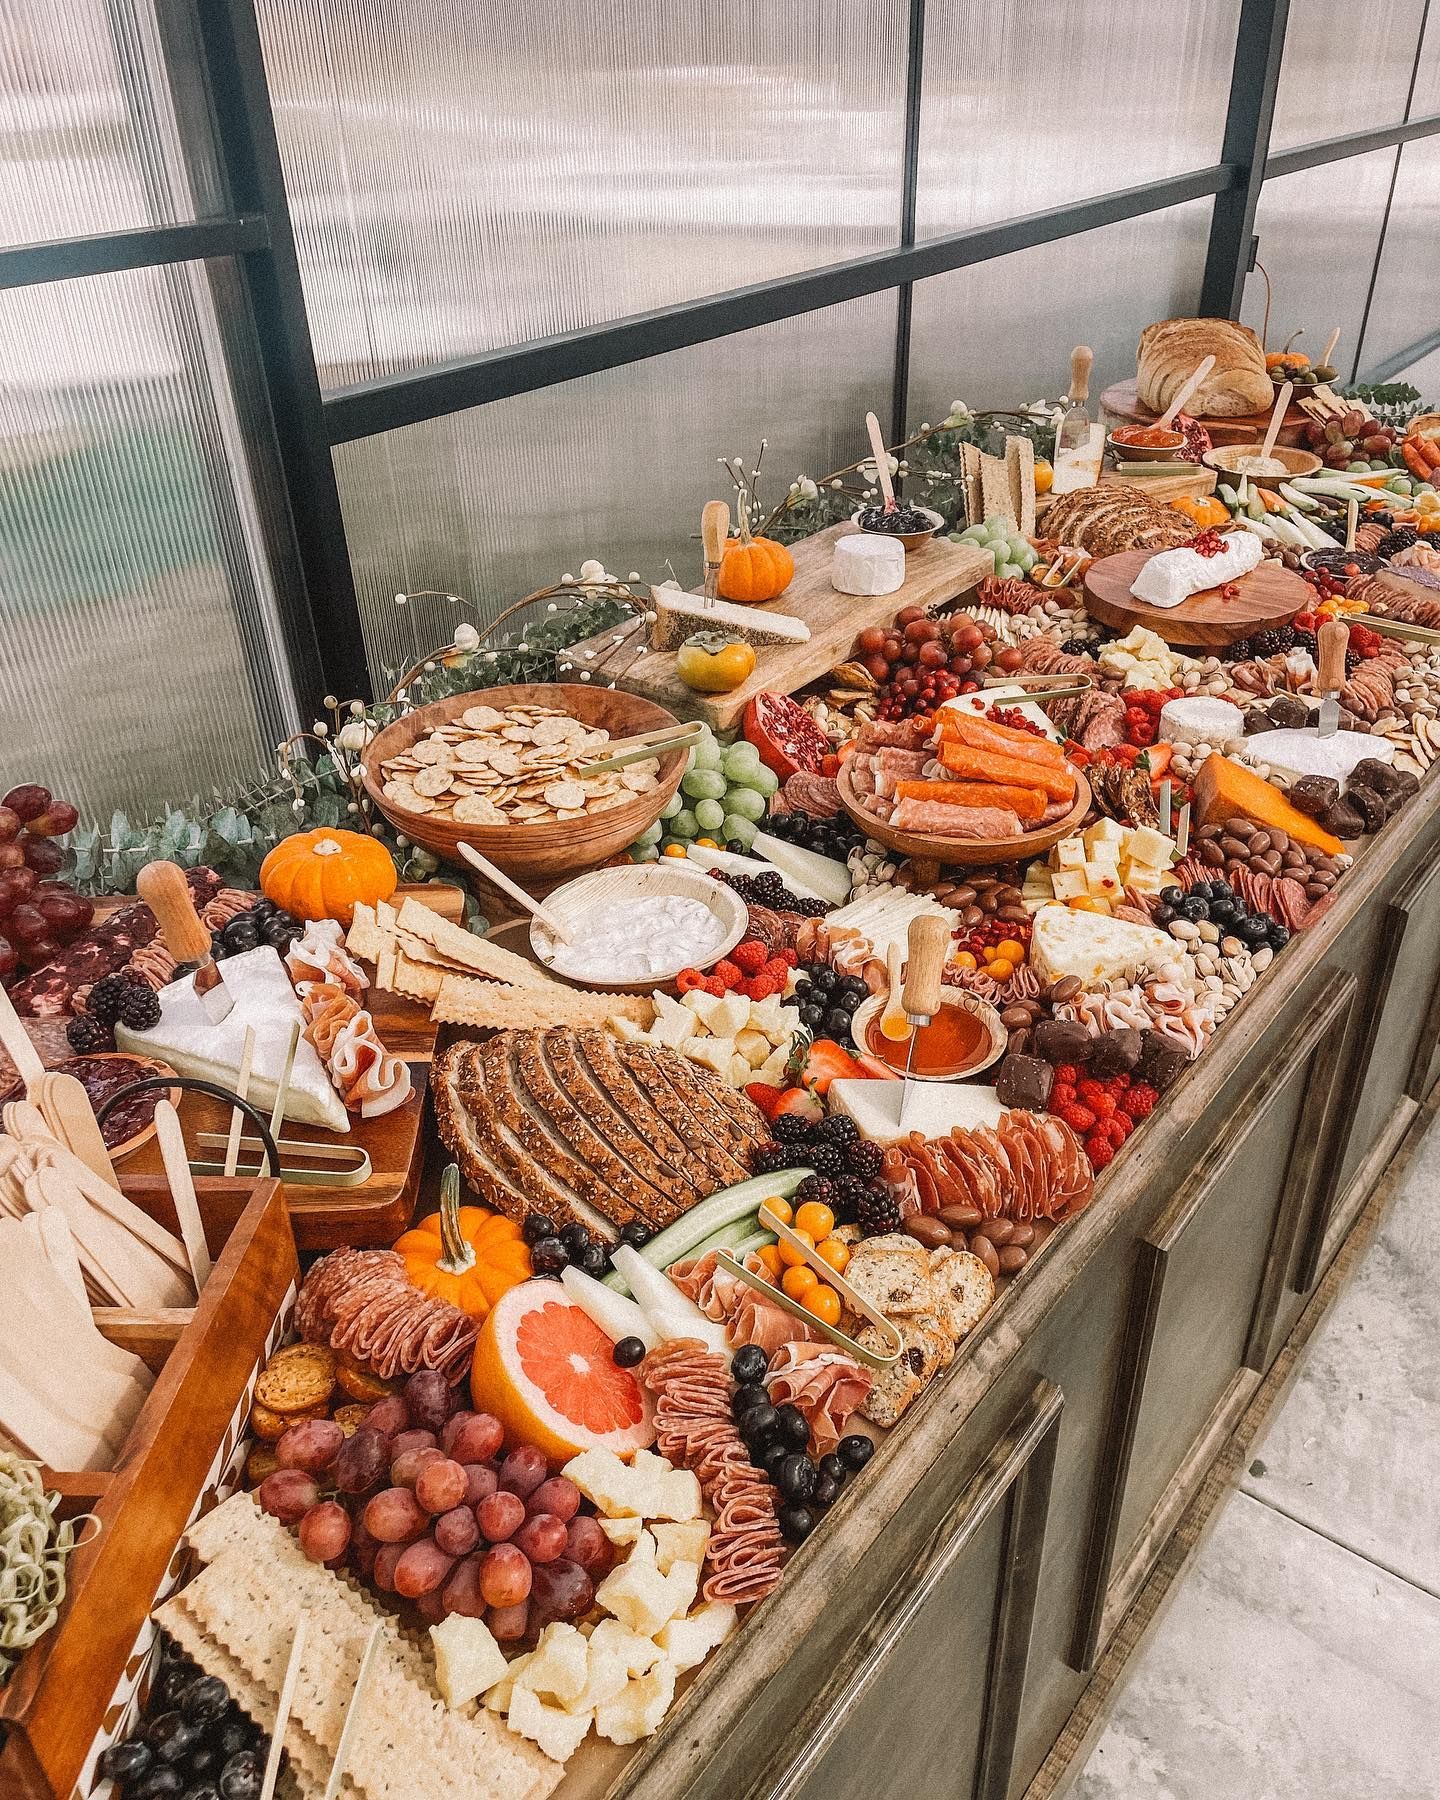 custom charcuterie grazing table from Olive + oak Charcuterie in Chattanooga, TN